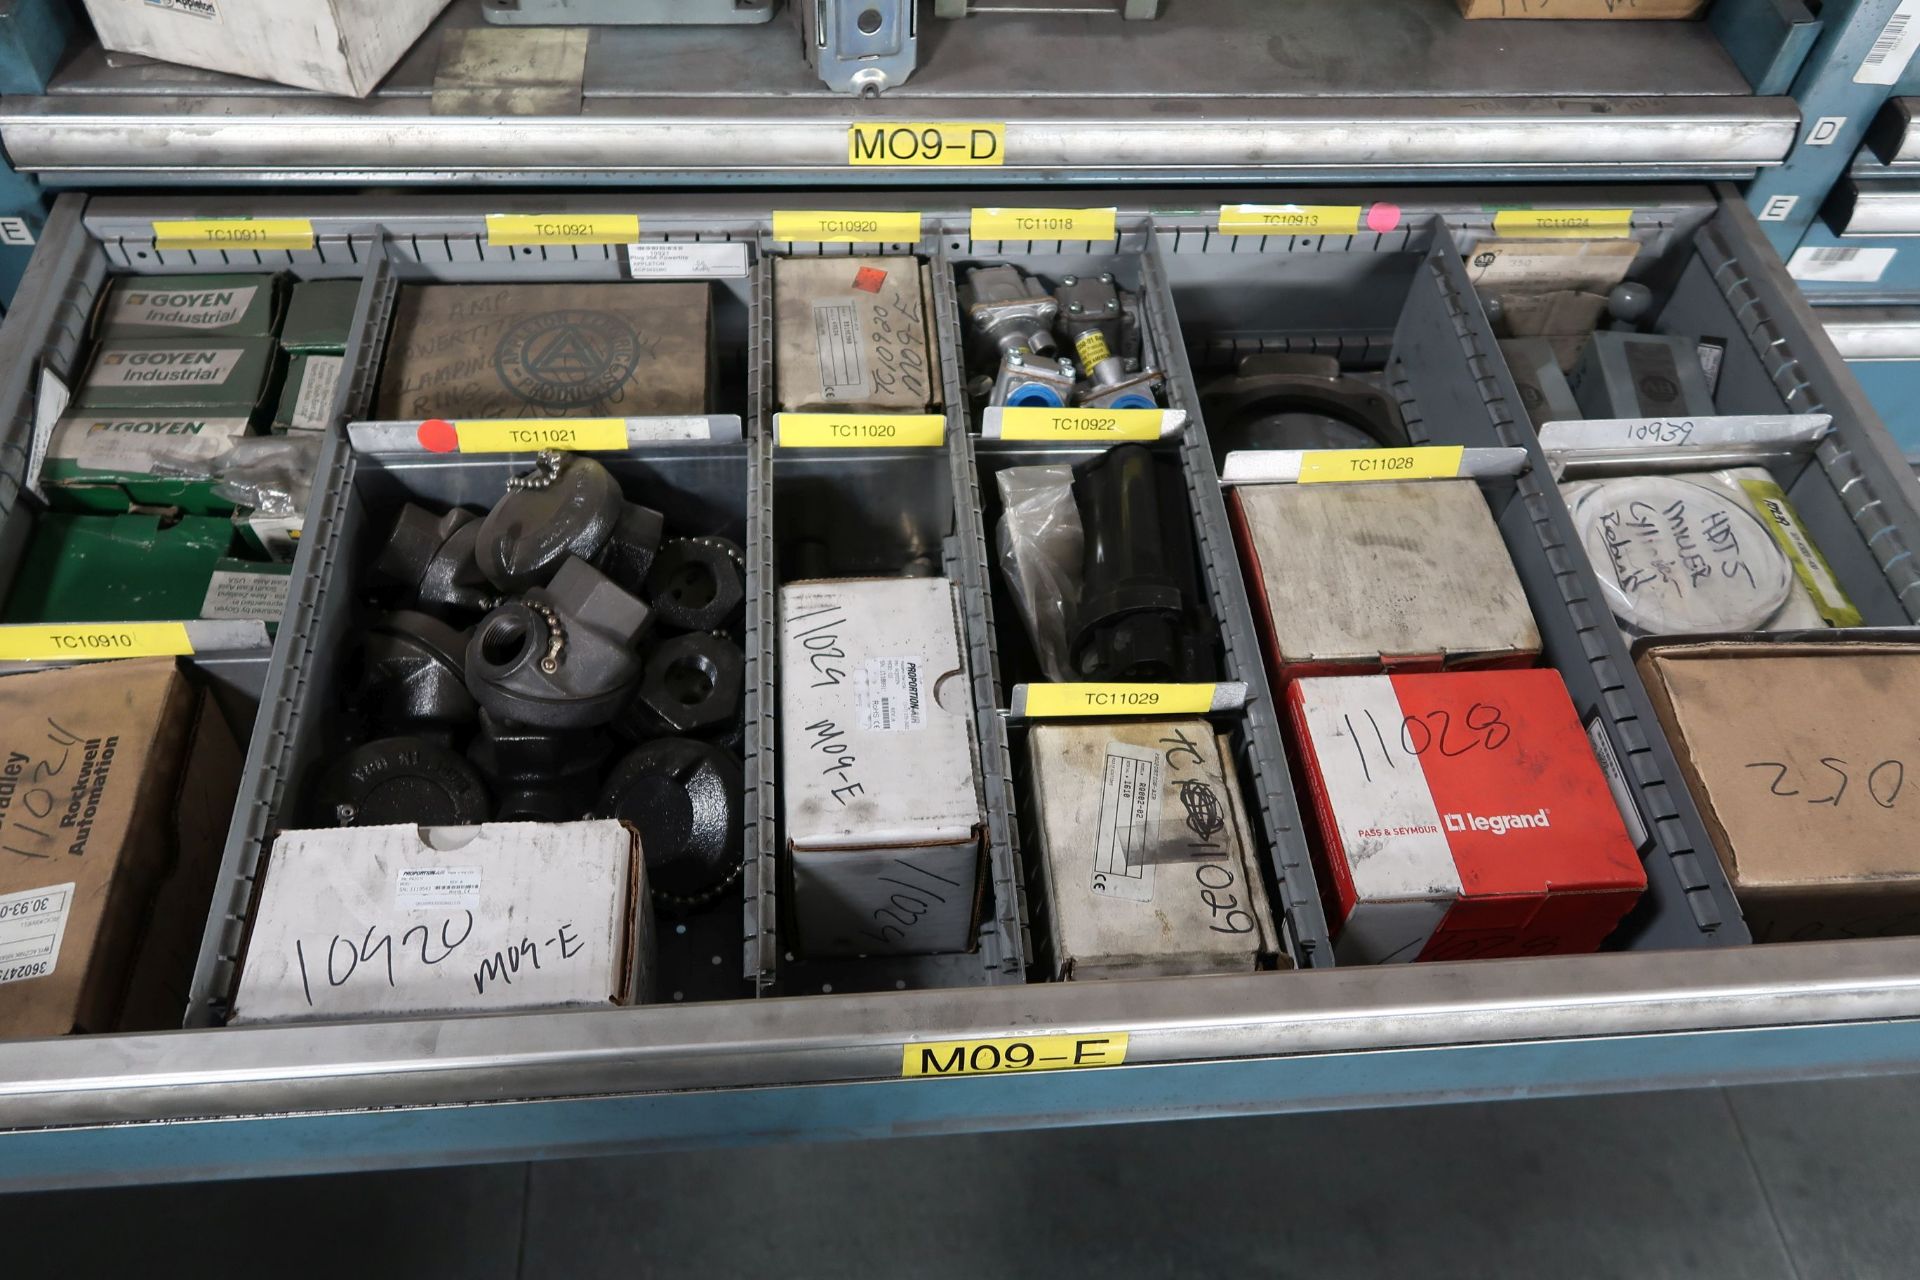 TOOLING CABINETS WITH CONTENTS - MOSTLY MACHINE PARTS **LOADING PRICE DUE TO ERRA - $2,000.00** - Image 53 of 59